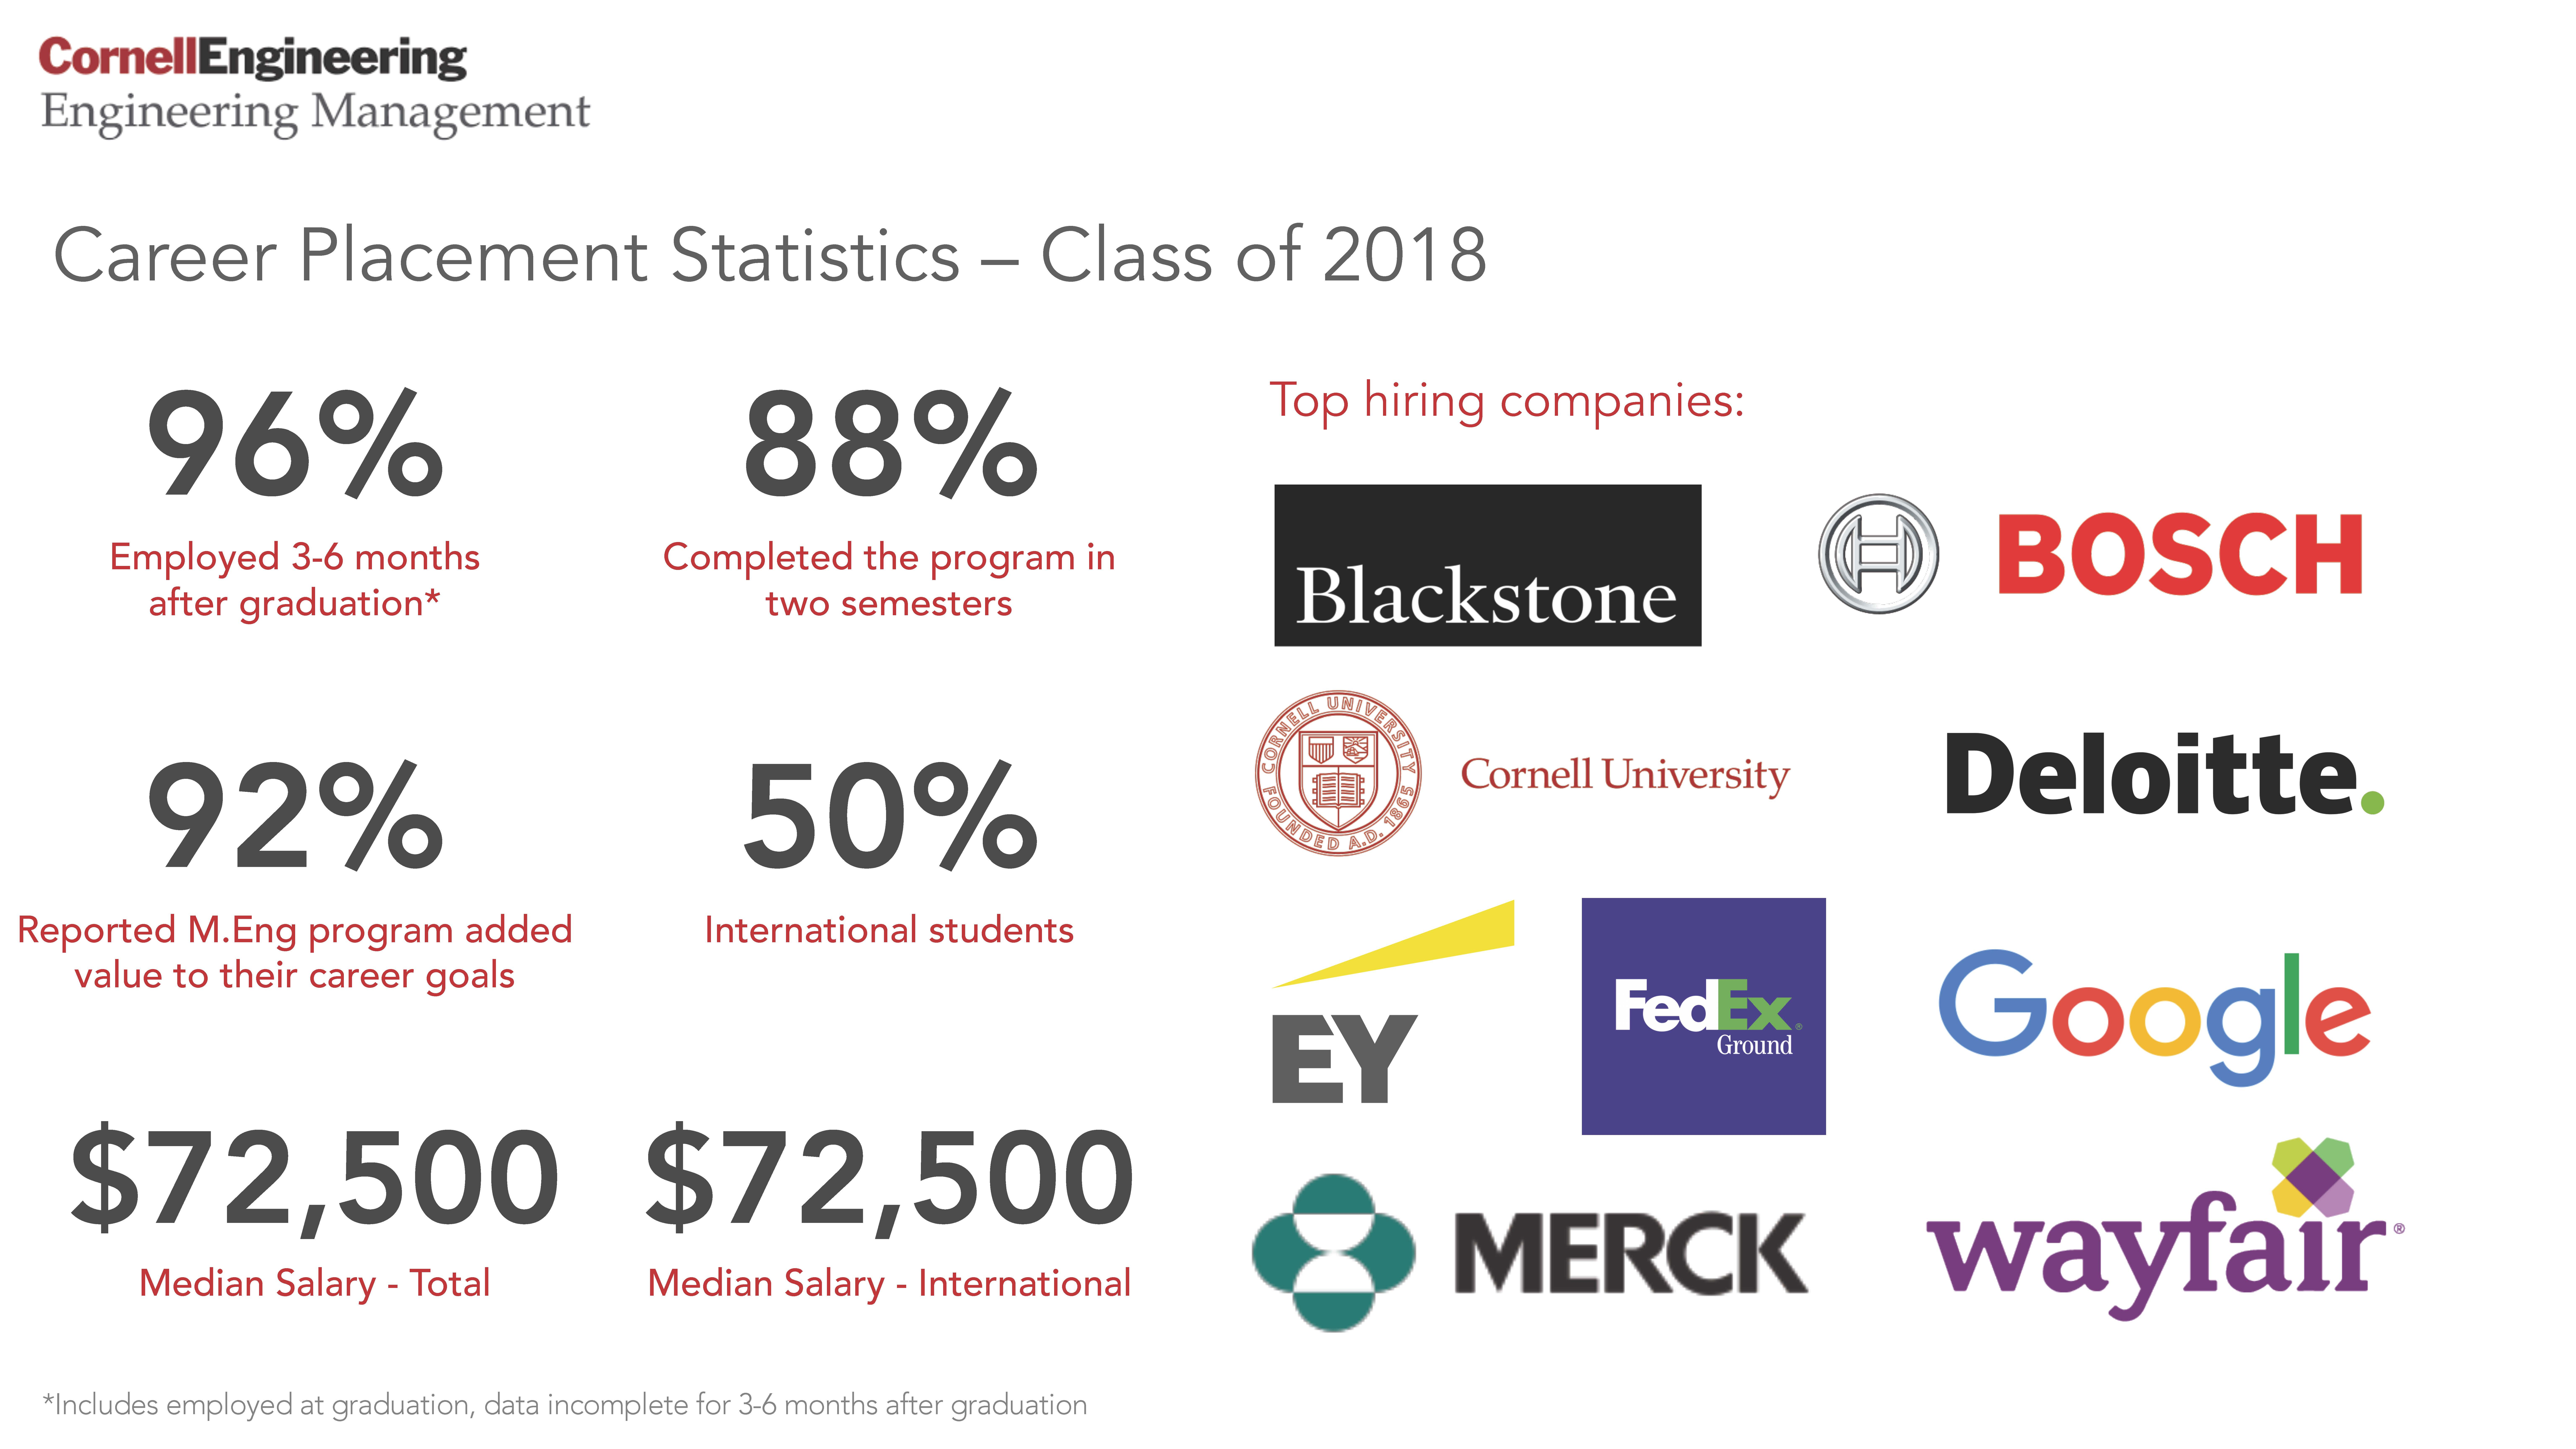 Cornell Engineering Management Career Placement Statistics – Class of 2018  96% Employed 3-6 months after graduation* 88% Completed the program in two semesters 92% Reported M.Eng. program added value to their career goals 50% International students $72,500 Median Salary – Total $72,500 Median Salary – International  *Includes employed at graduation, data incomplete for 3-6 months after graduation  Top hiring companies Blackstone Bosch Cornell University Deloitte EY FedEx Google Merck Wayfair